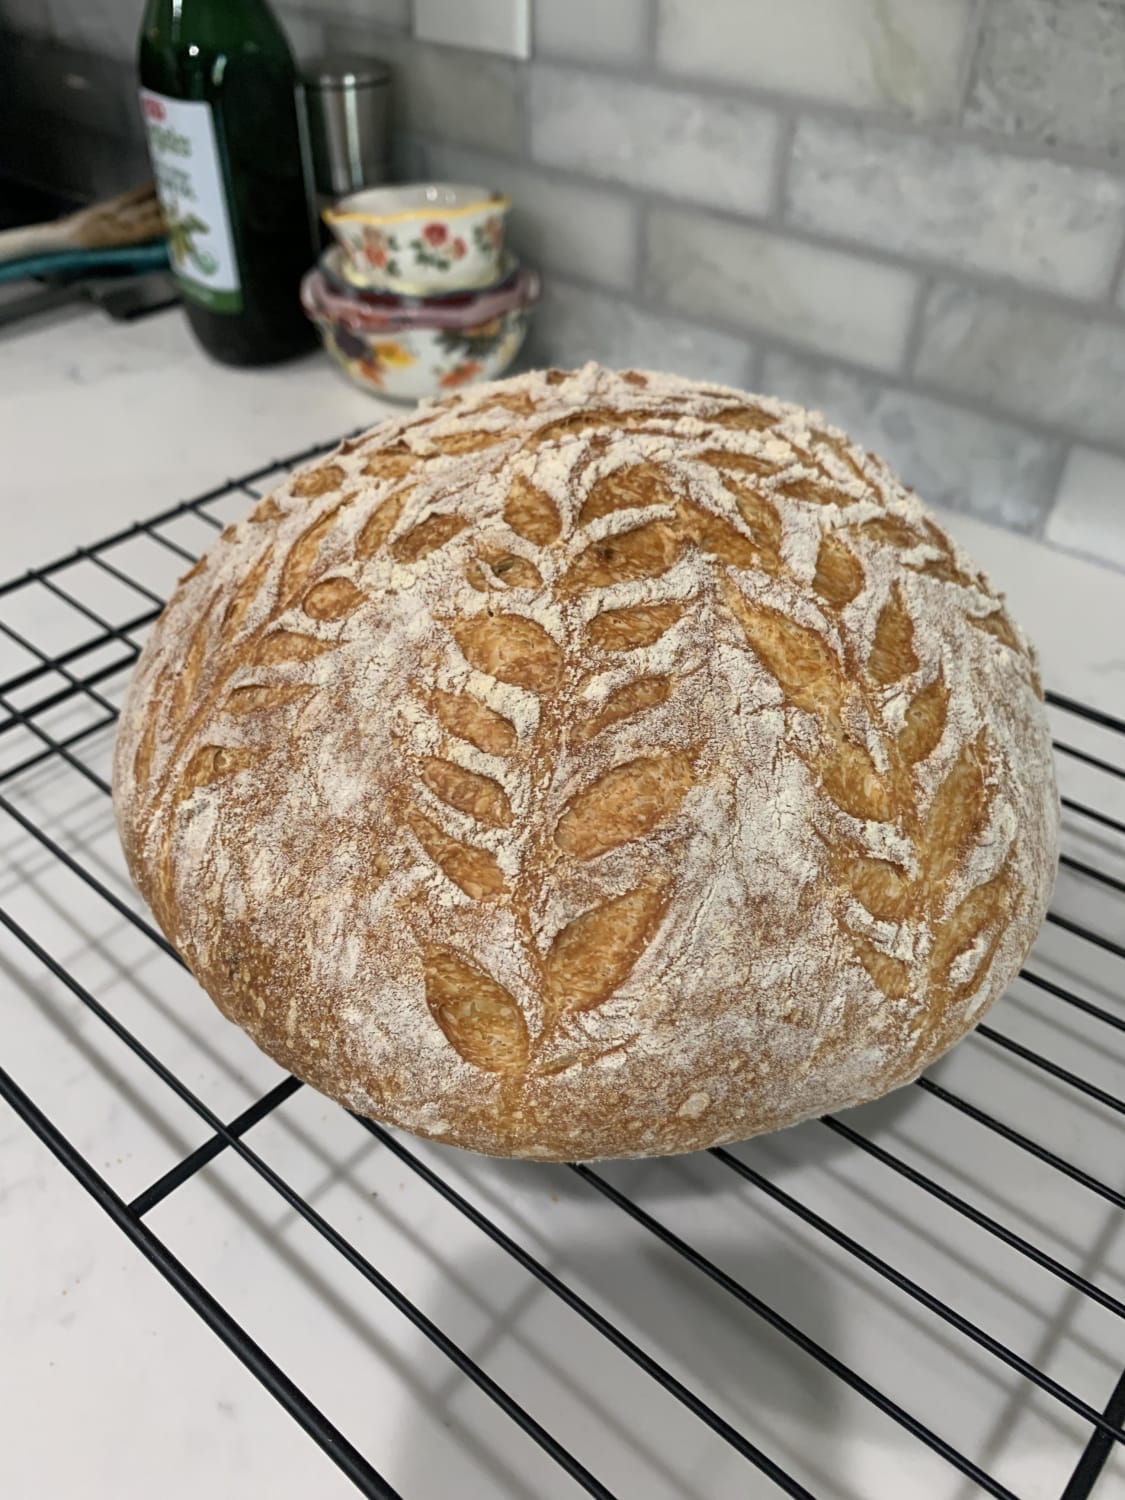 First time to try a design on top of my sourdough!